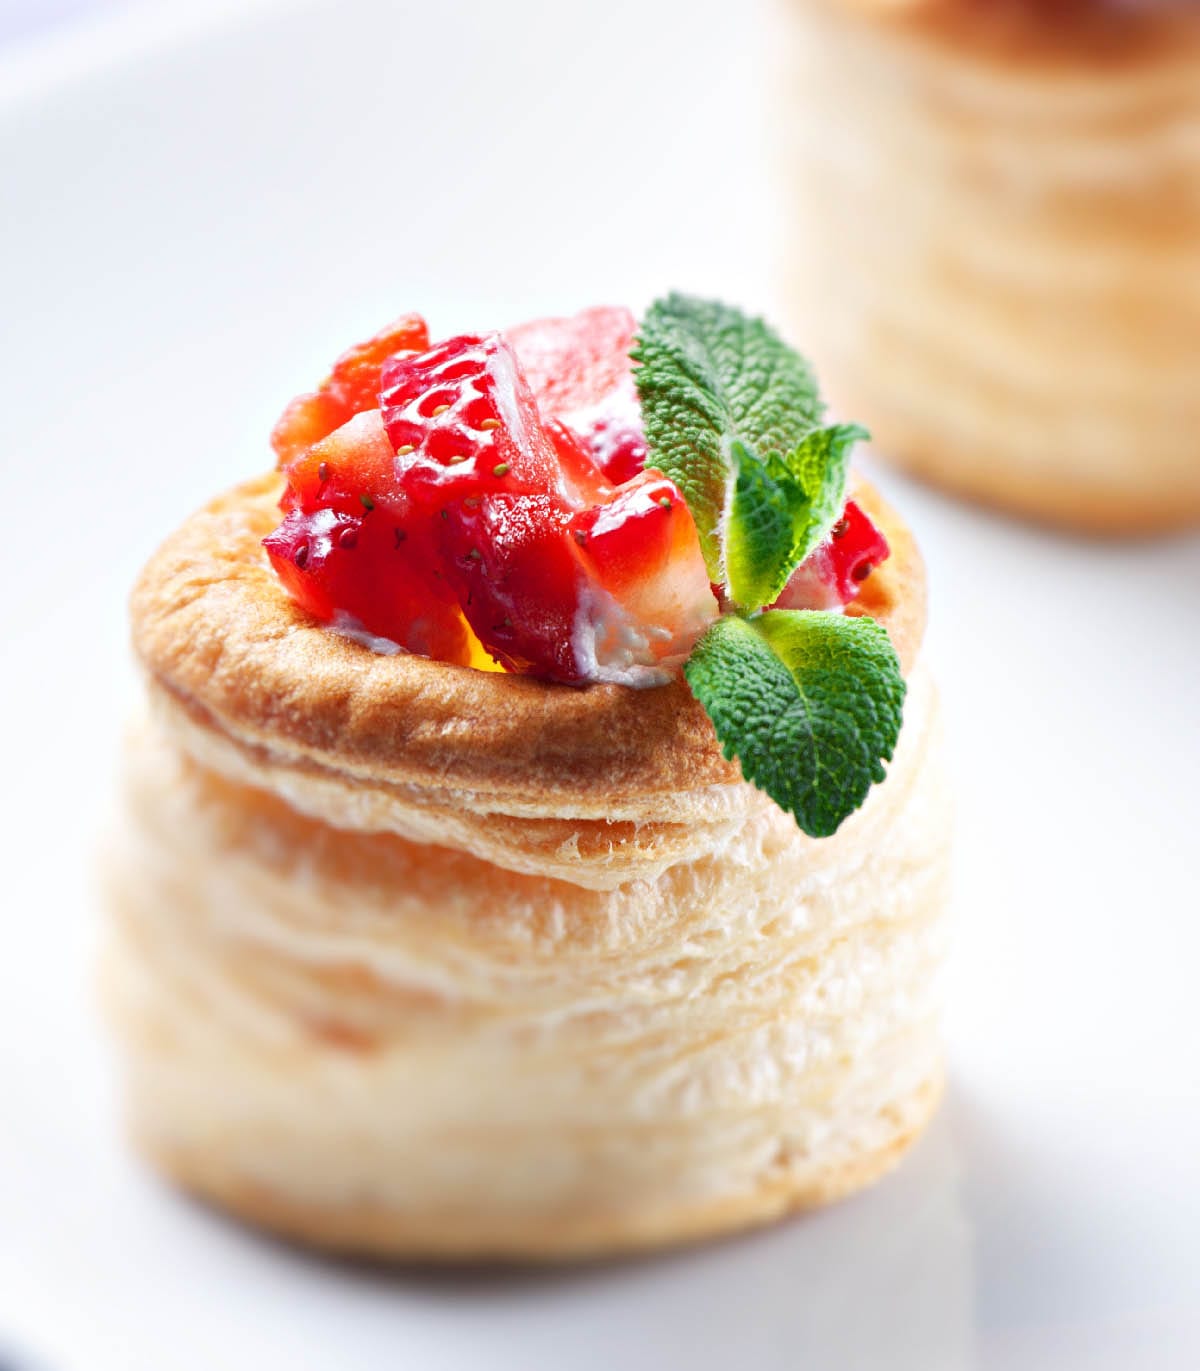 Photo of completed recipe for Fruit and Strawberry Cream Filled Vol-au-Vents